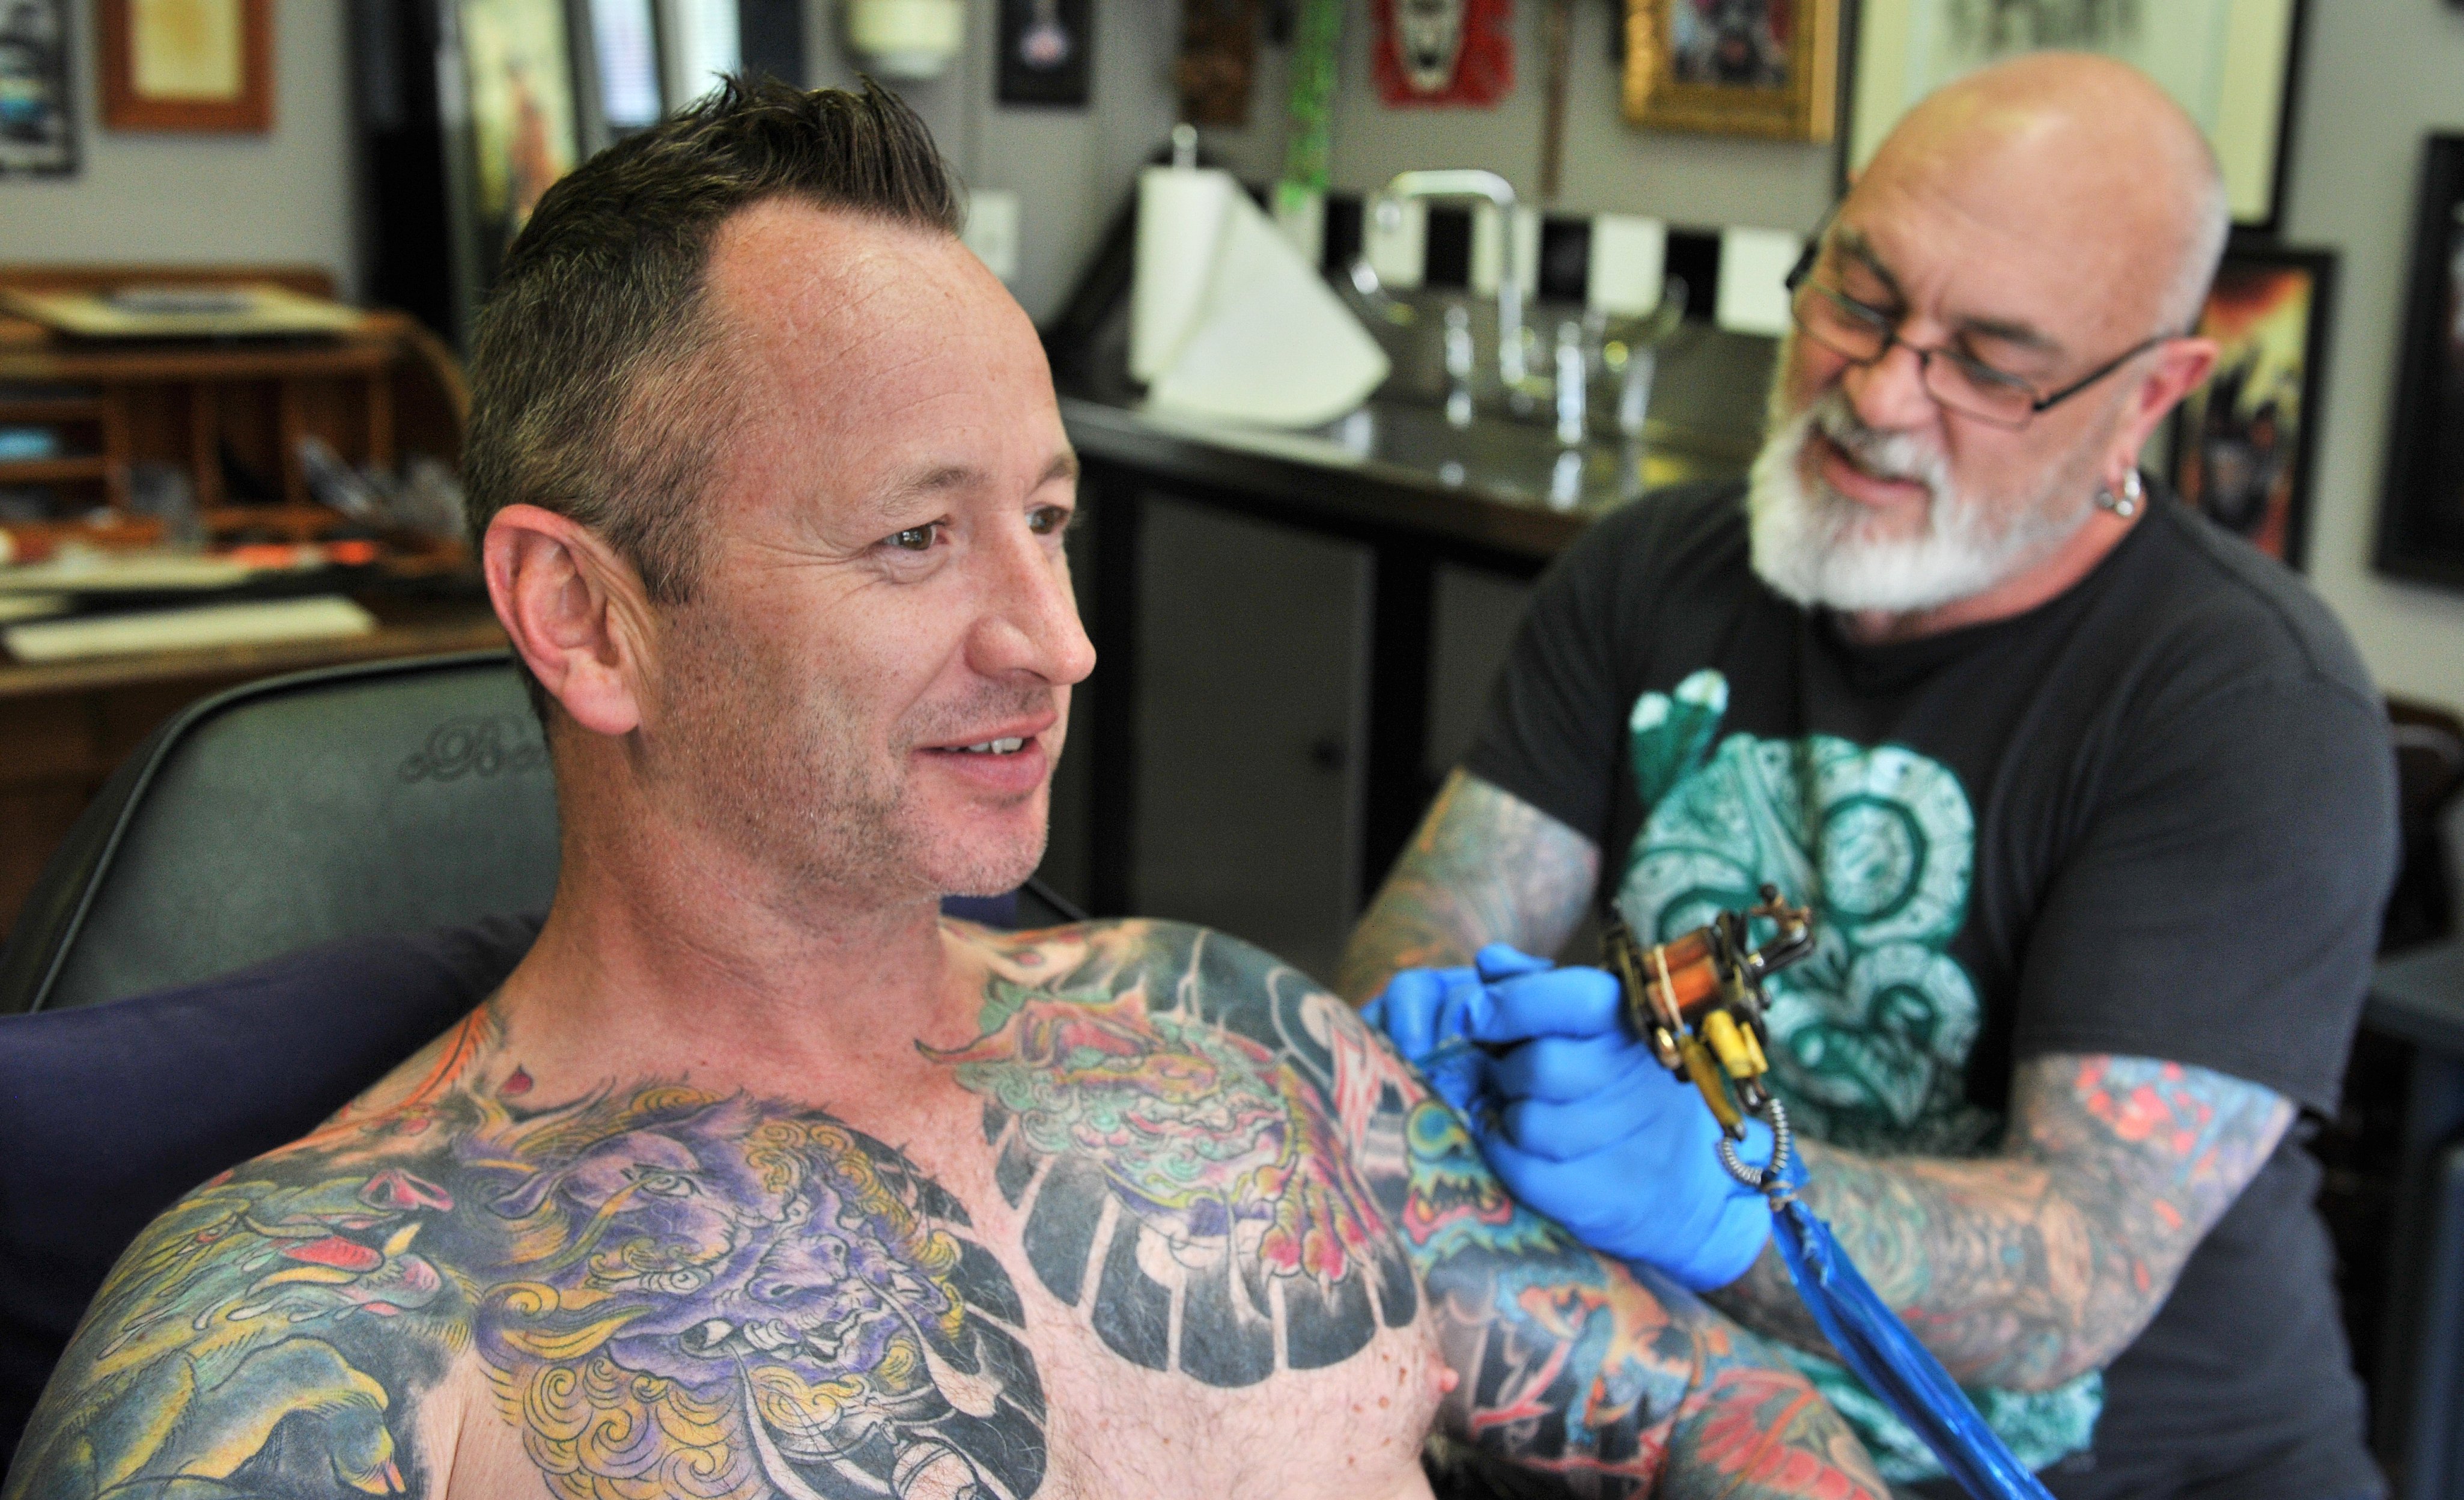 Tattoos commemorate family story | Otago Daily Times Online News